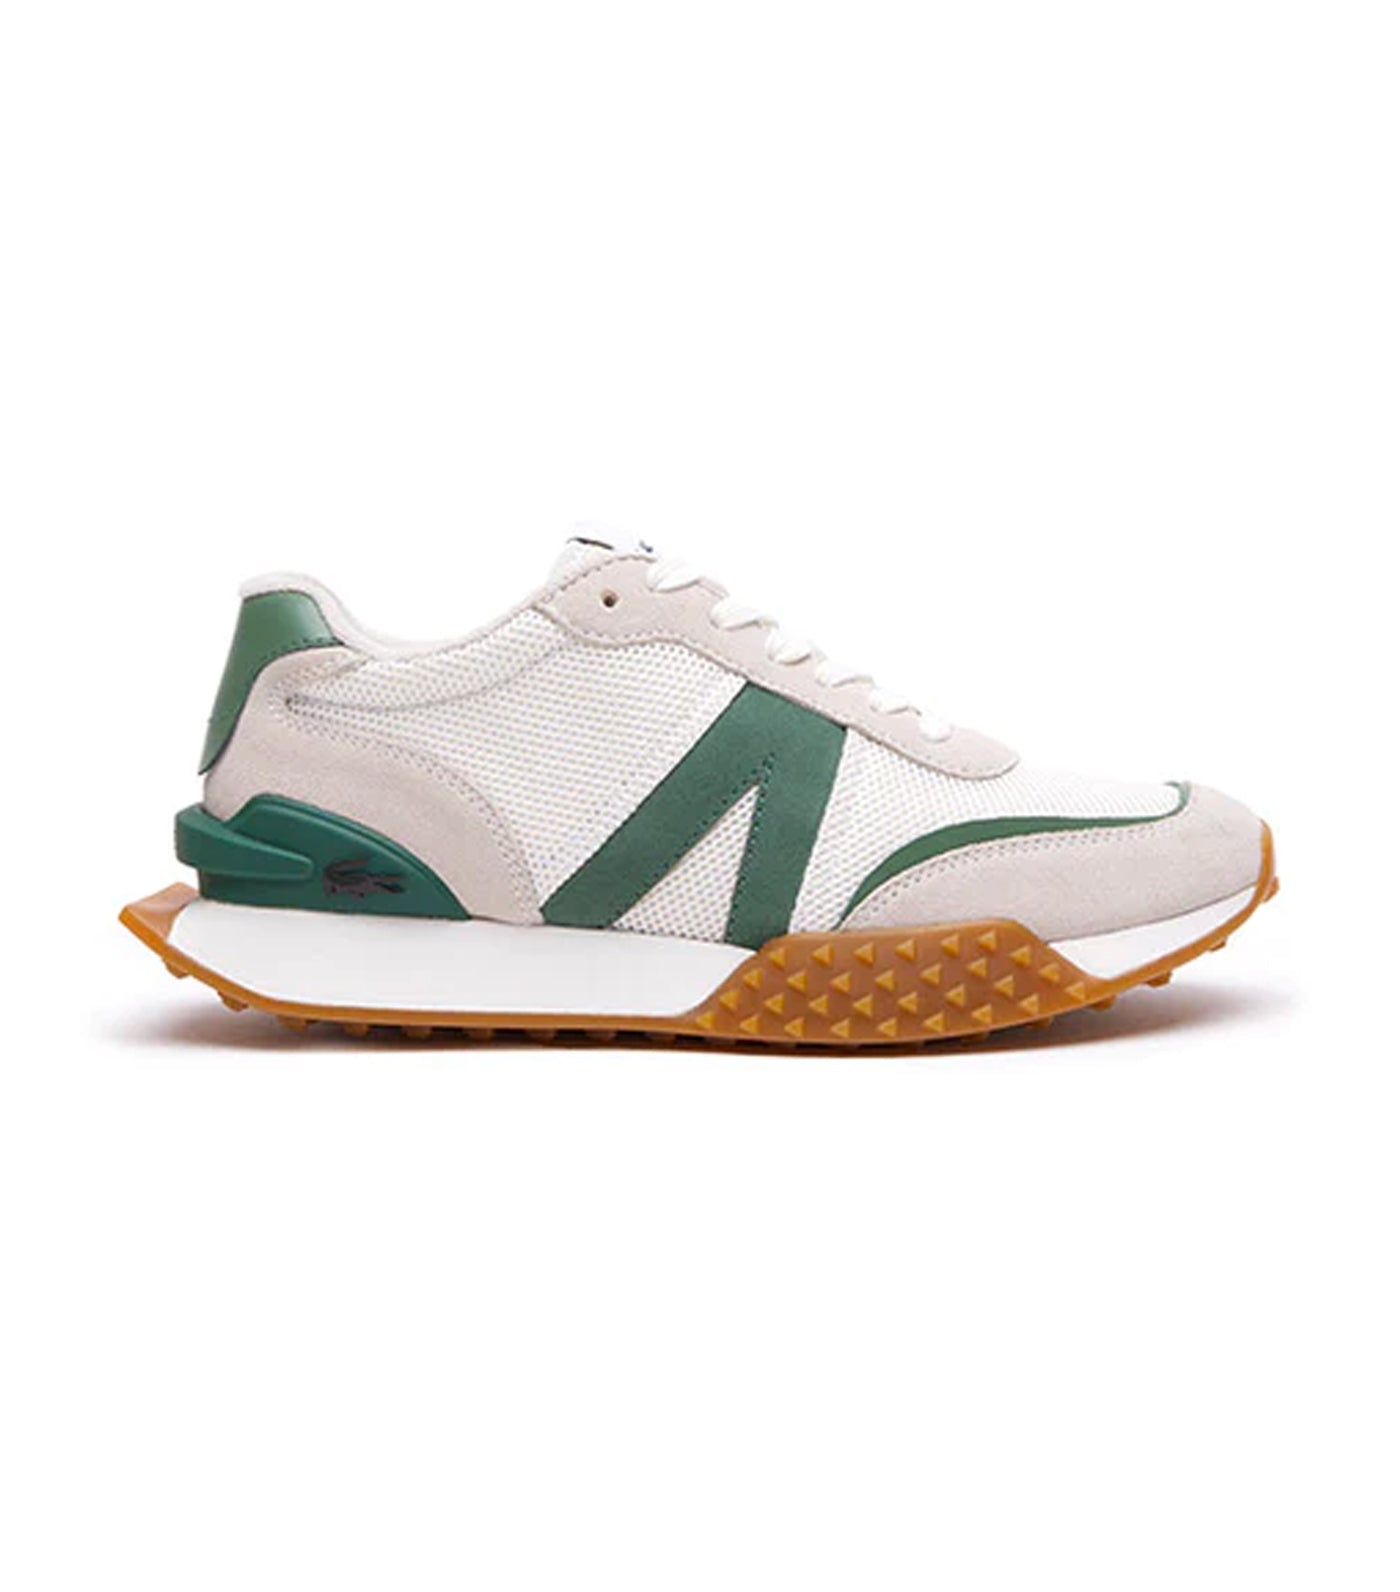 Women's L-Spin Deluxe Leather Heel Pop Sneakers White/Green